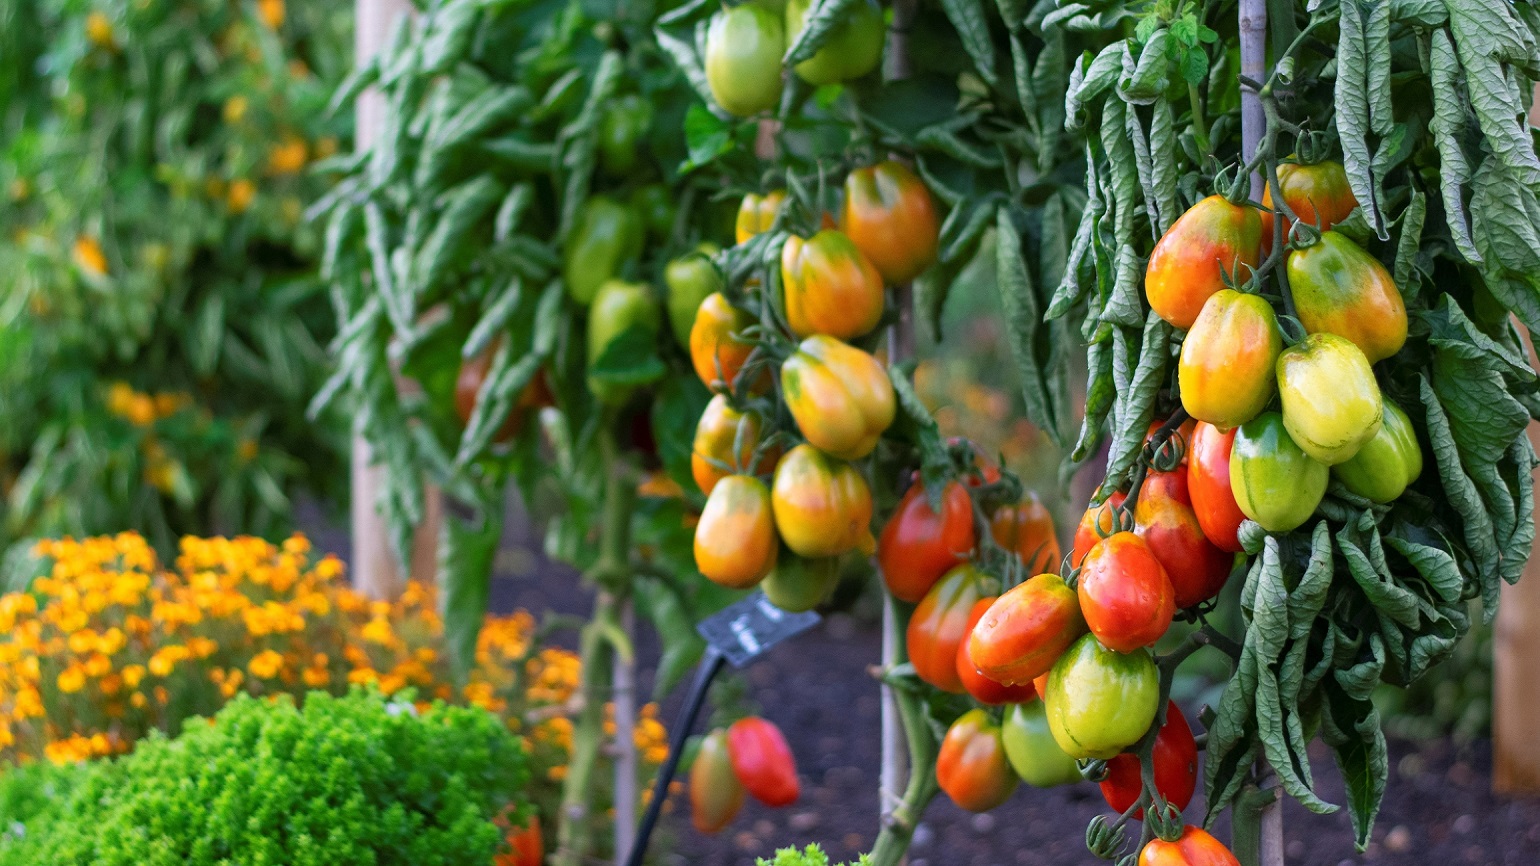 Red, yellow and green tomatoes growing on green vines in the kitchen garden at kew